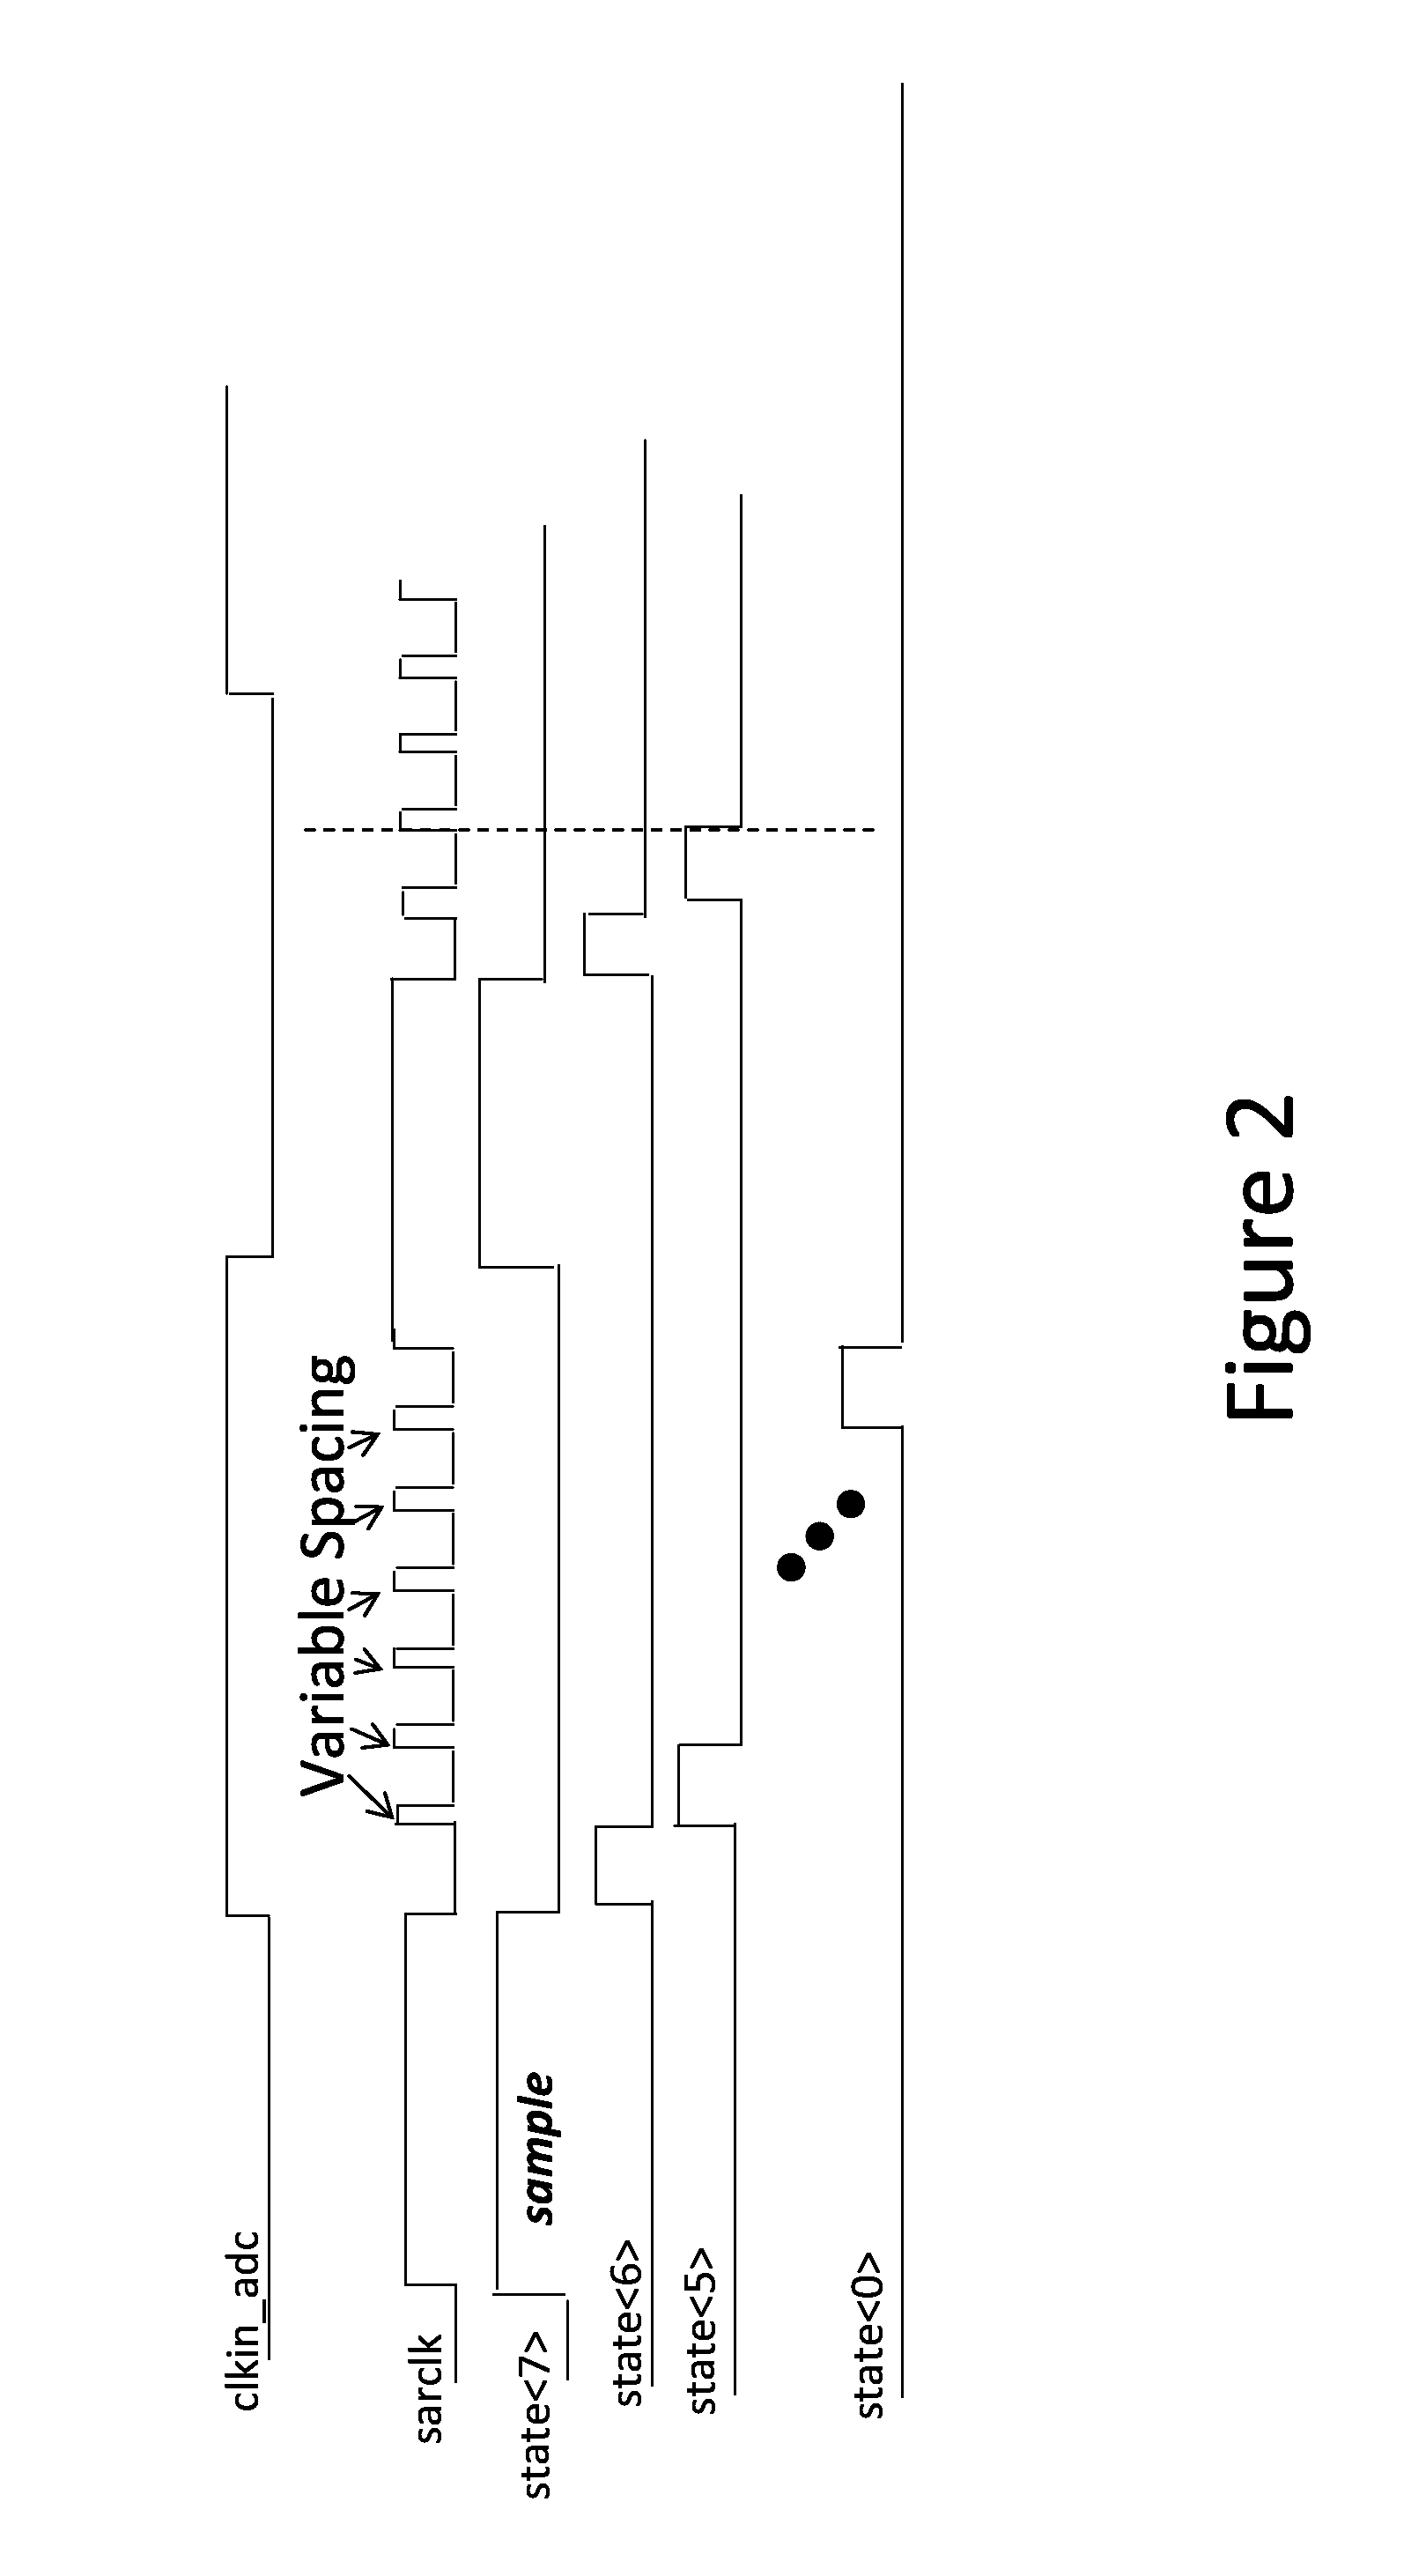 Metastability error detection and correction system and method for successive approximation analog-to-digital converters